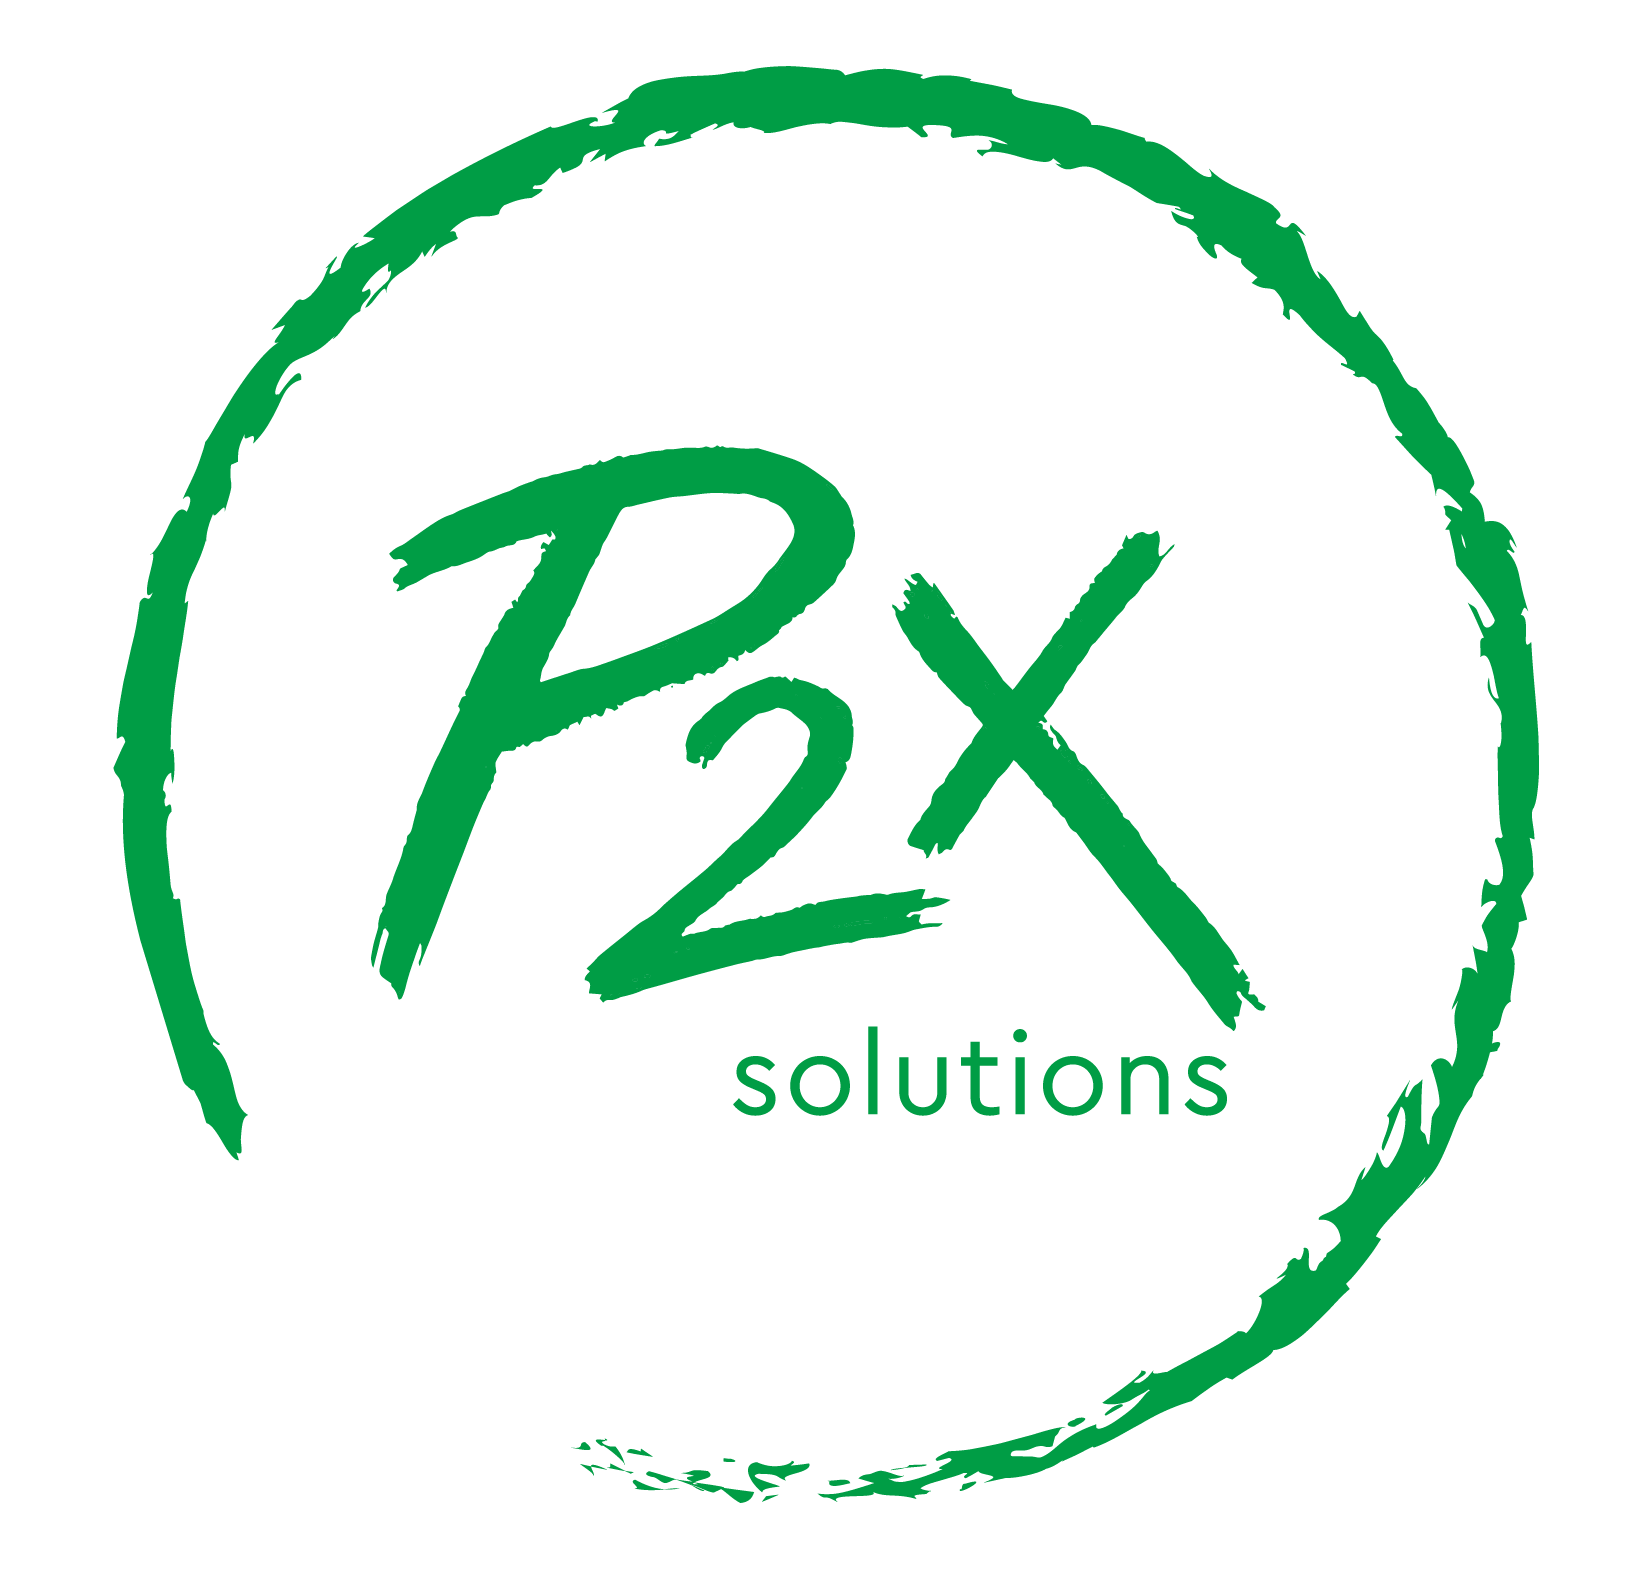 P2X Solutions Oy